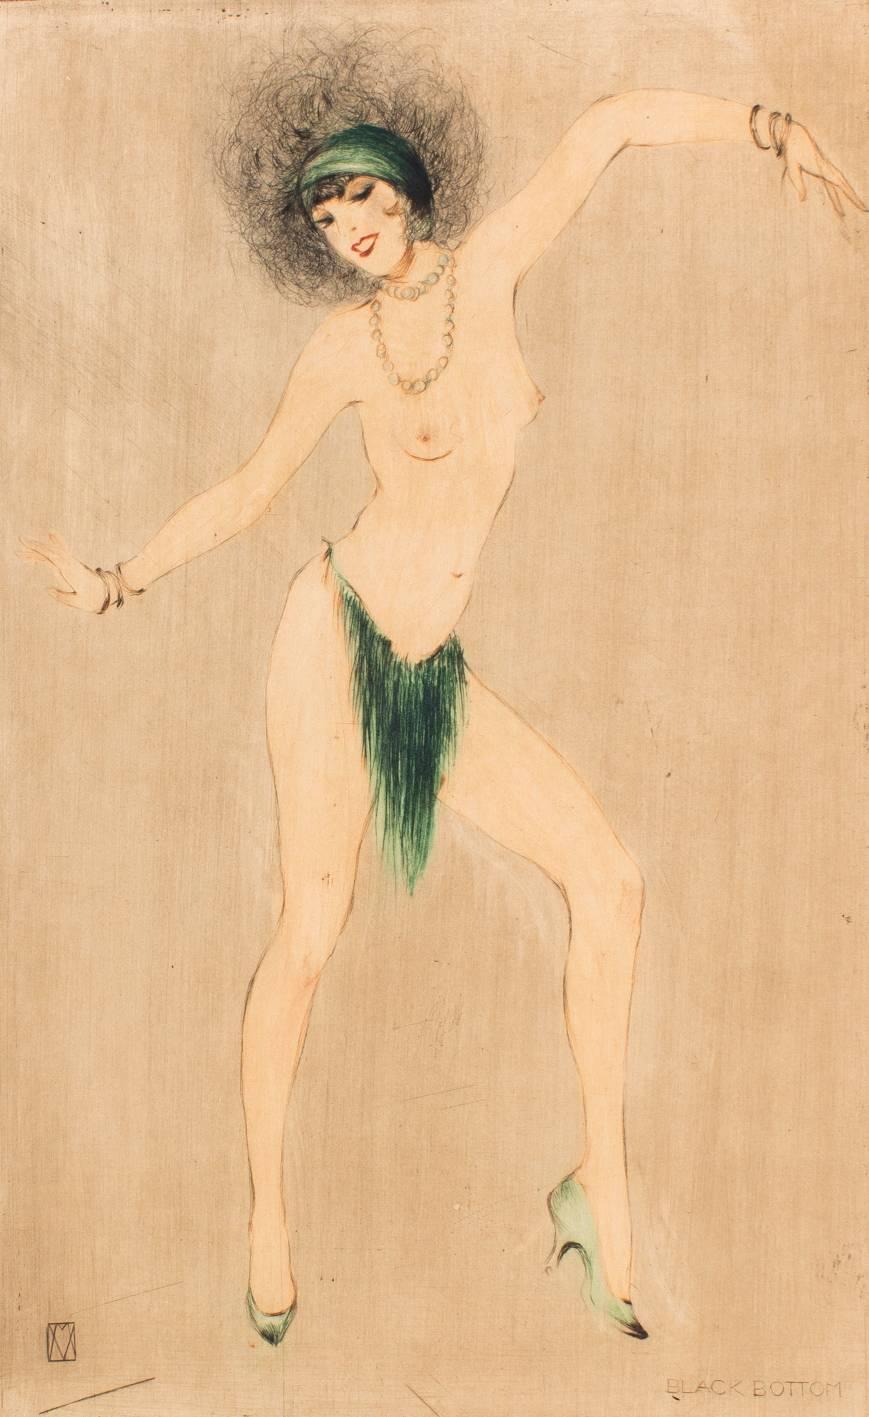 Vala Moro (1907), Vienna
Art Deco dancing nude “Black Bottom”, circa 1924
Original colored etching, pencil-signed lower right “Vala Moro” and monogrammed in etching, titled “BLACK BOTTOM”

Vala Moro was an Austrian-Hungarian dancer and artist.